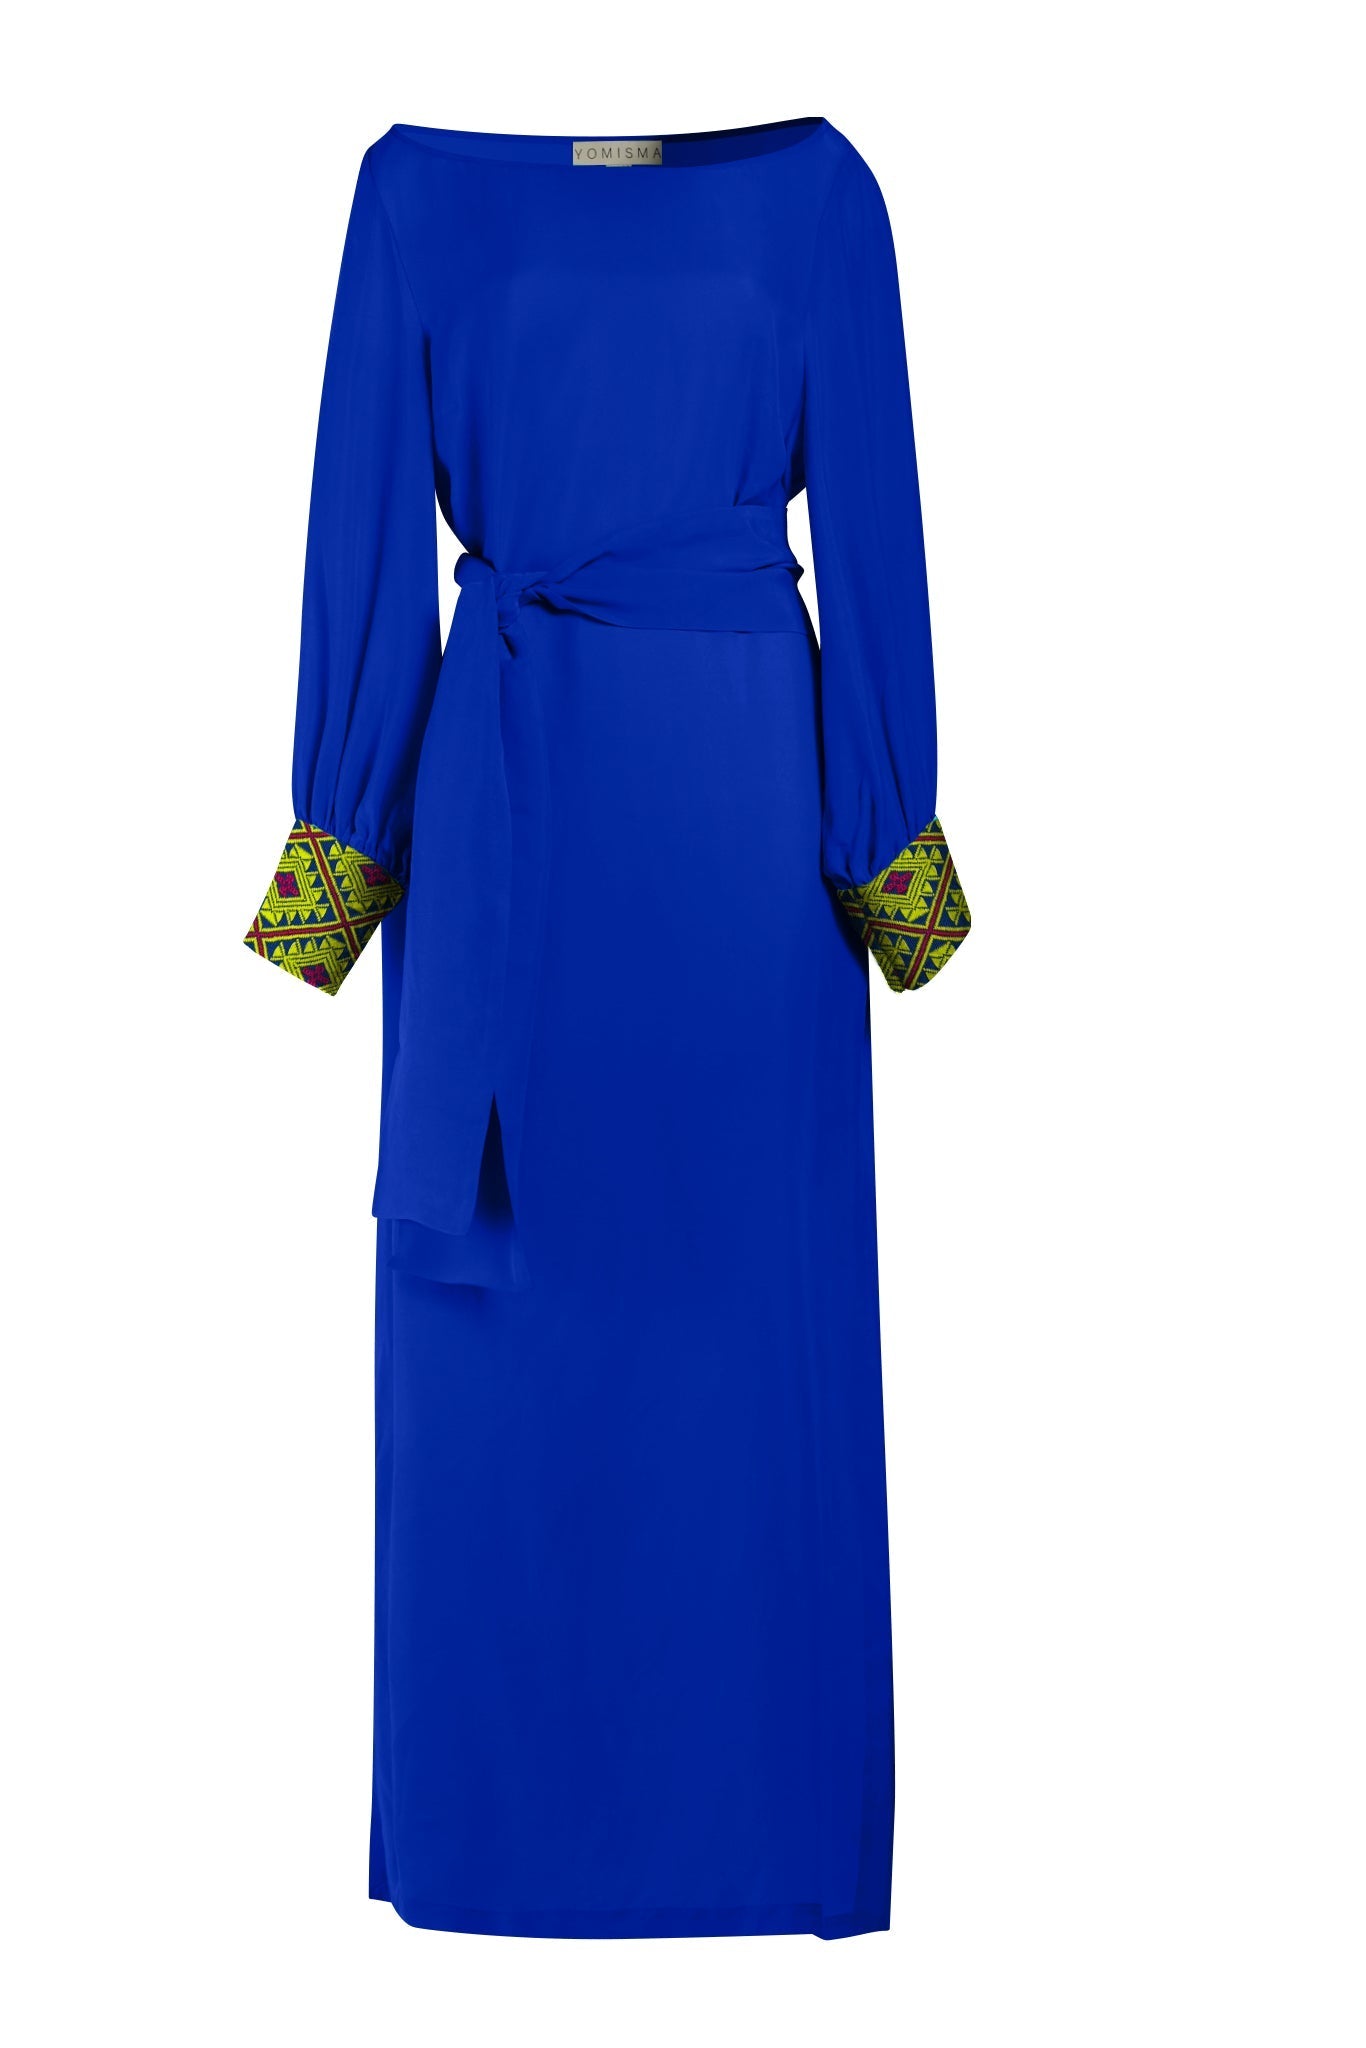 close up view of royal blue kaftan duster with embroidered sleeves made from recycled materials 2